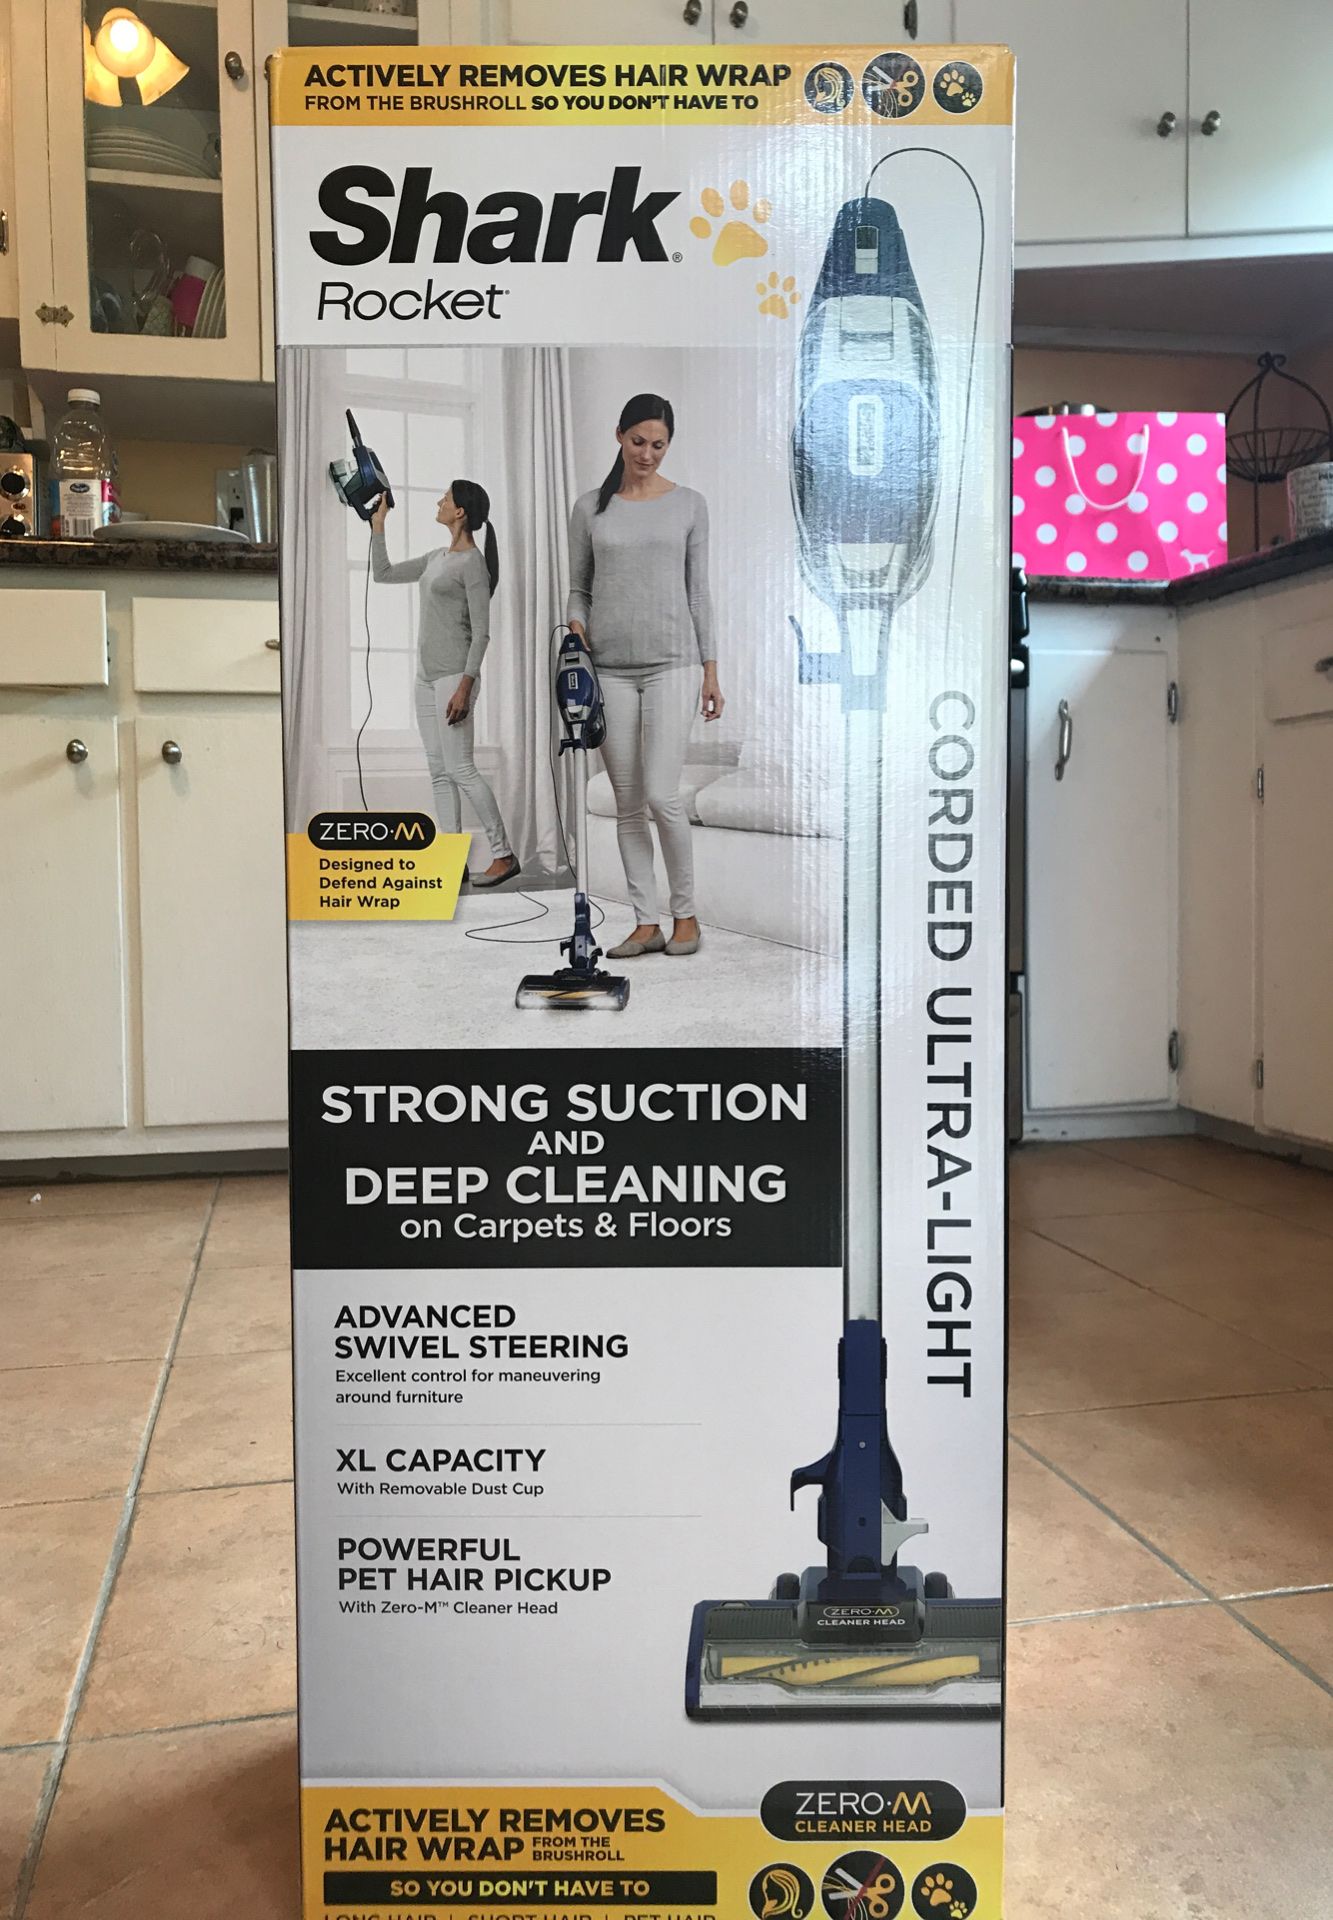 Shark rocket Stick vacuum with south cleaning brush roll